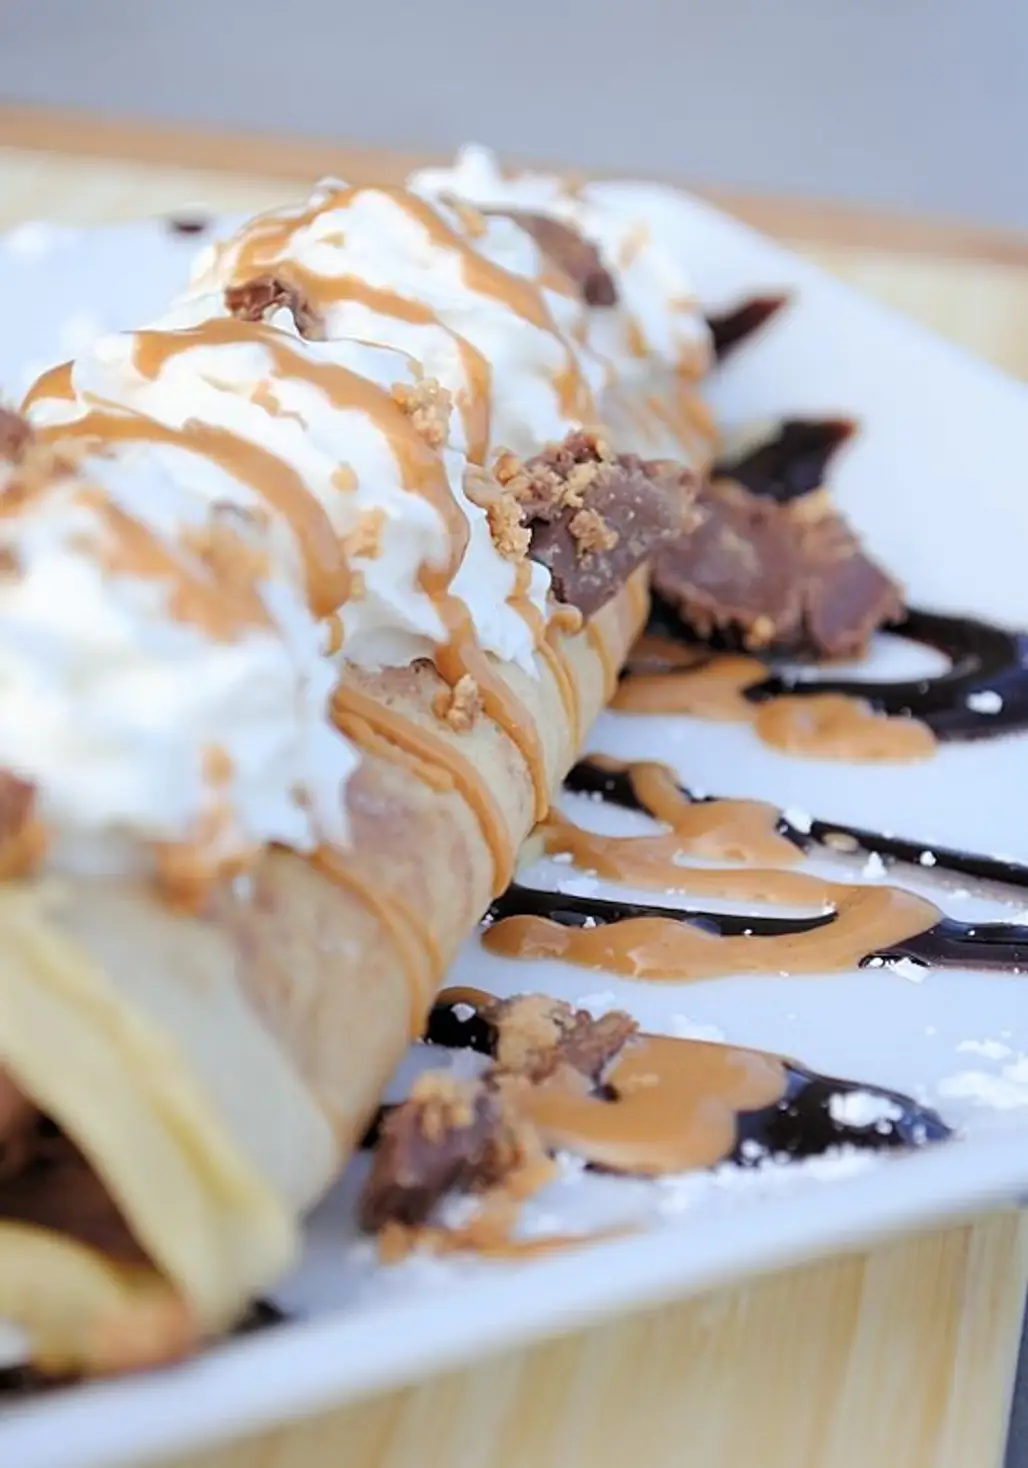 Chocolate Reese's Peanut Butter Cup Crêpes